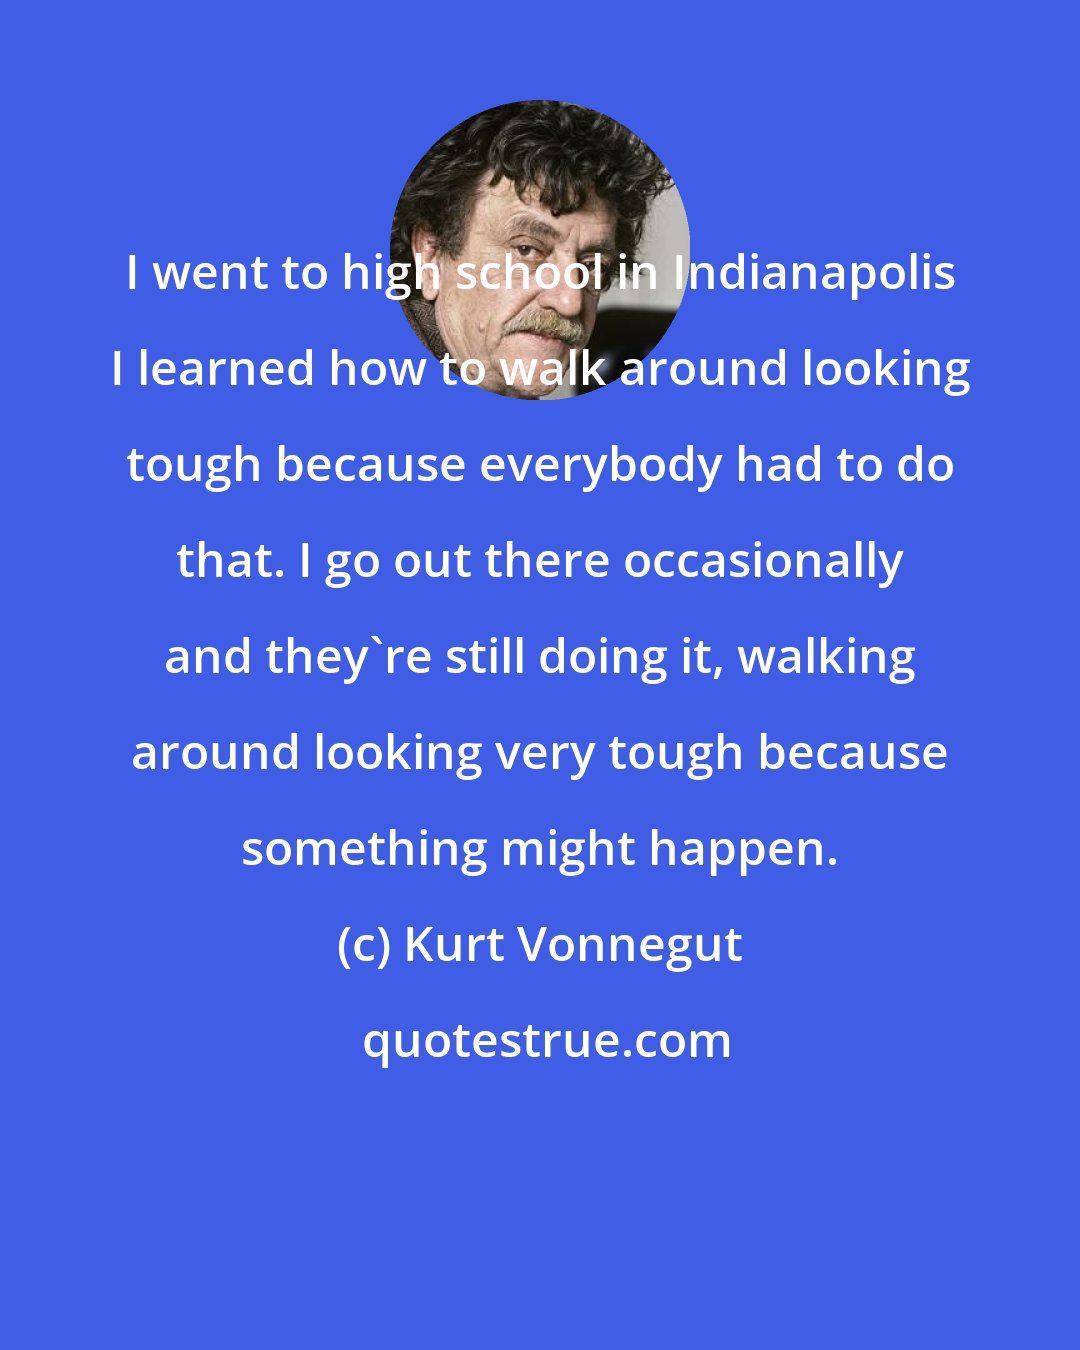 Kurt Vonnegut: I went to high school in Indianapolis I learned how to walk around looking tough because everybody had to do that. I go out there occasionally and they're still doing it, walking around looking very tough because something might happen.